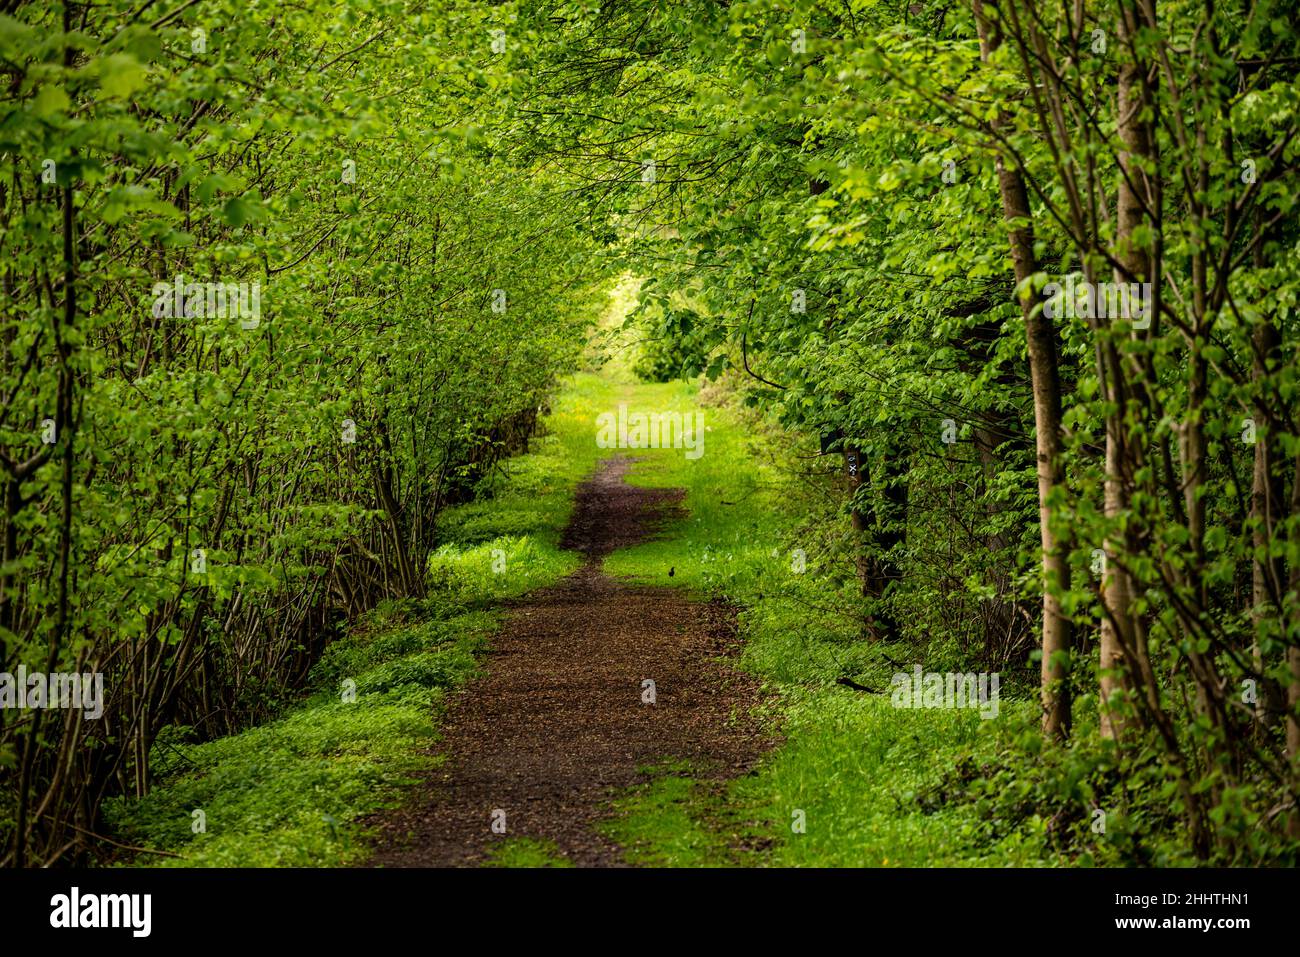 Straight path through a spring-like forest, section of the 'Burgensteig X2' hiking trail, near Eschenbruch, Teutoburg Forest, Germany Stock Photo